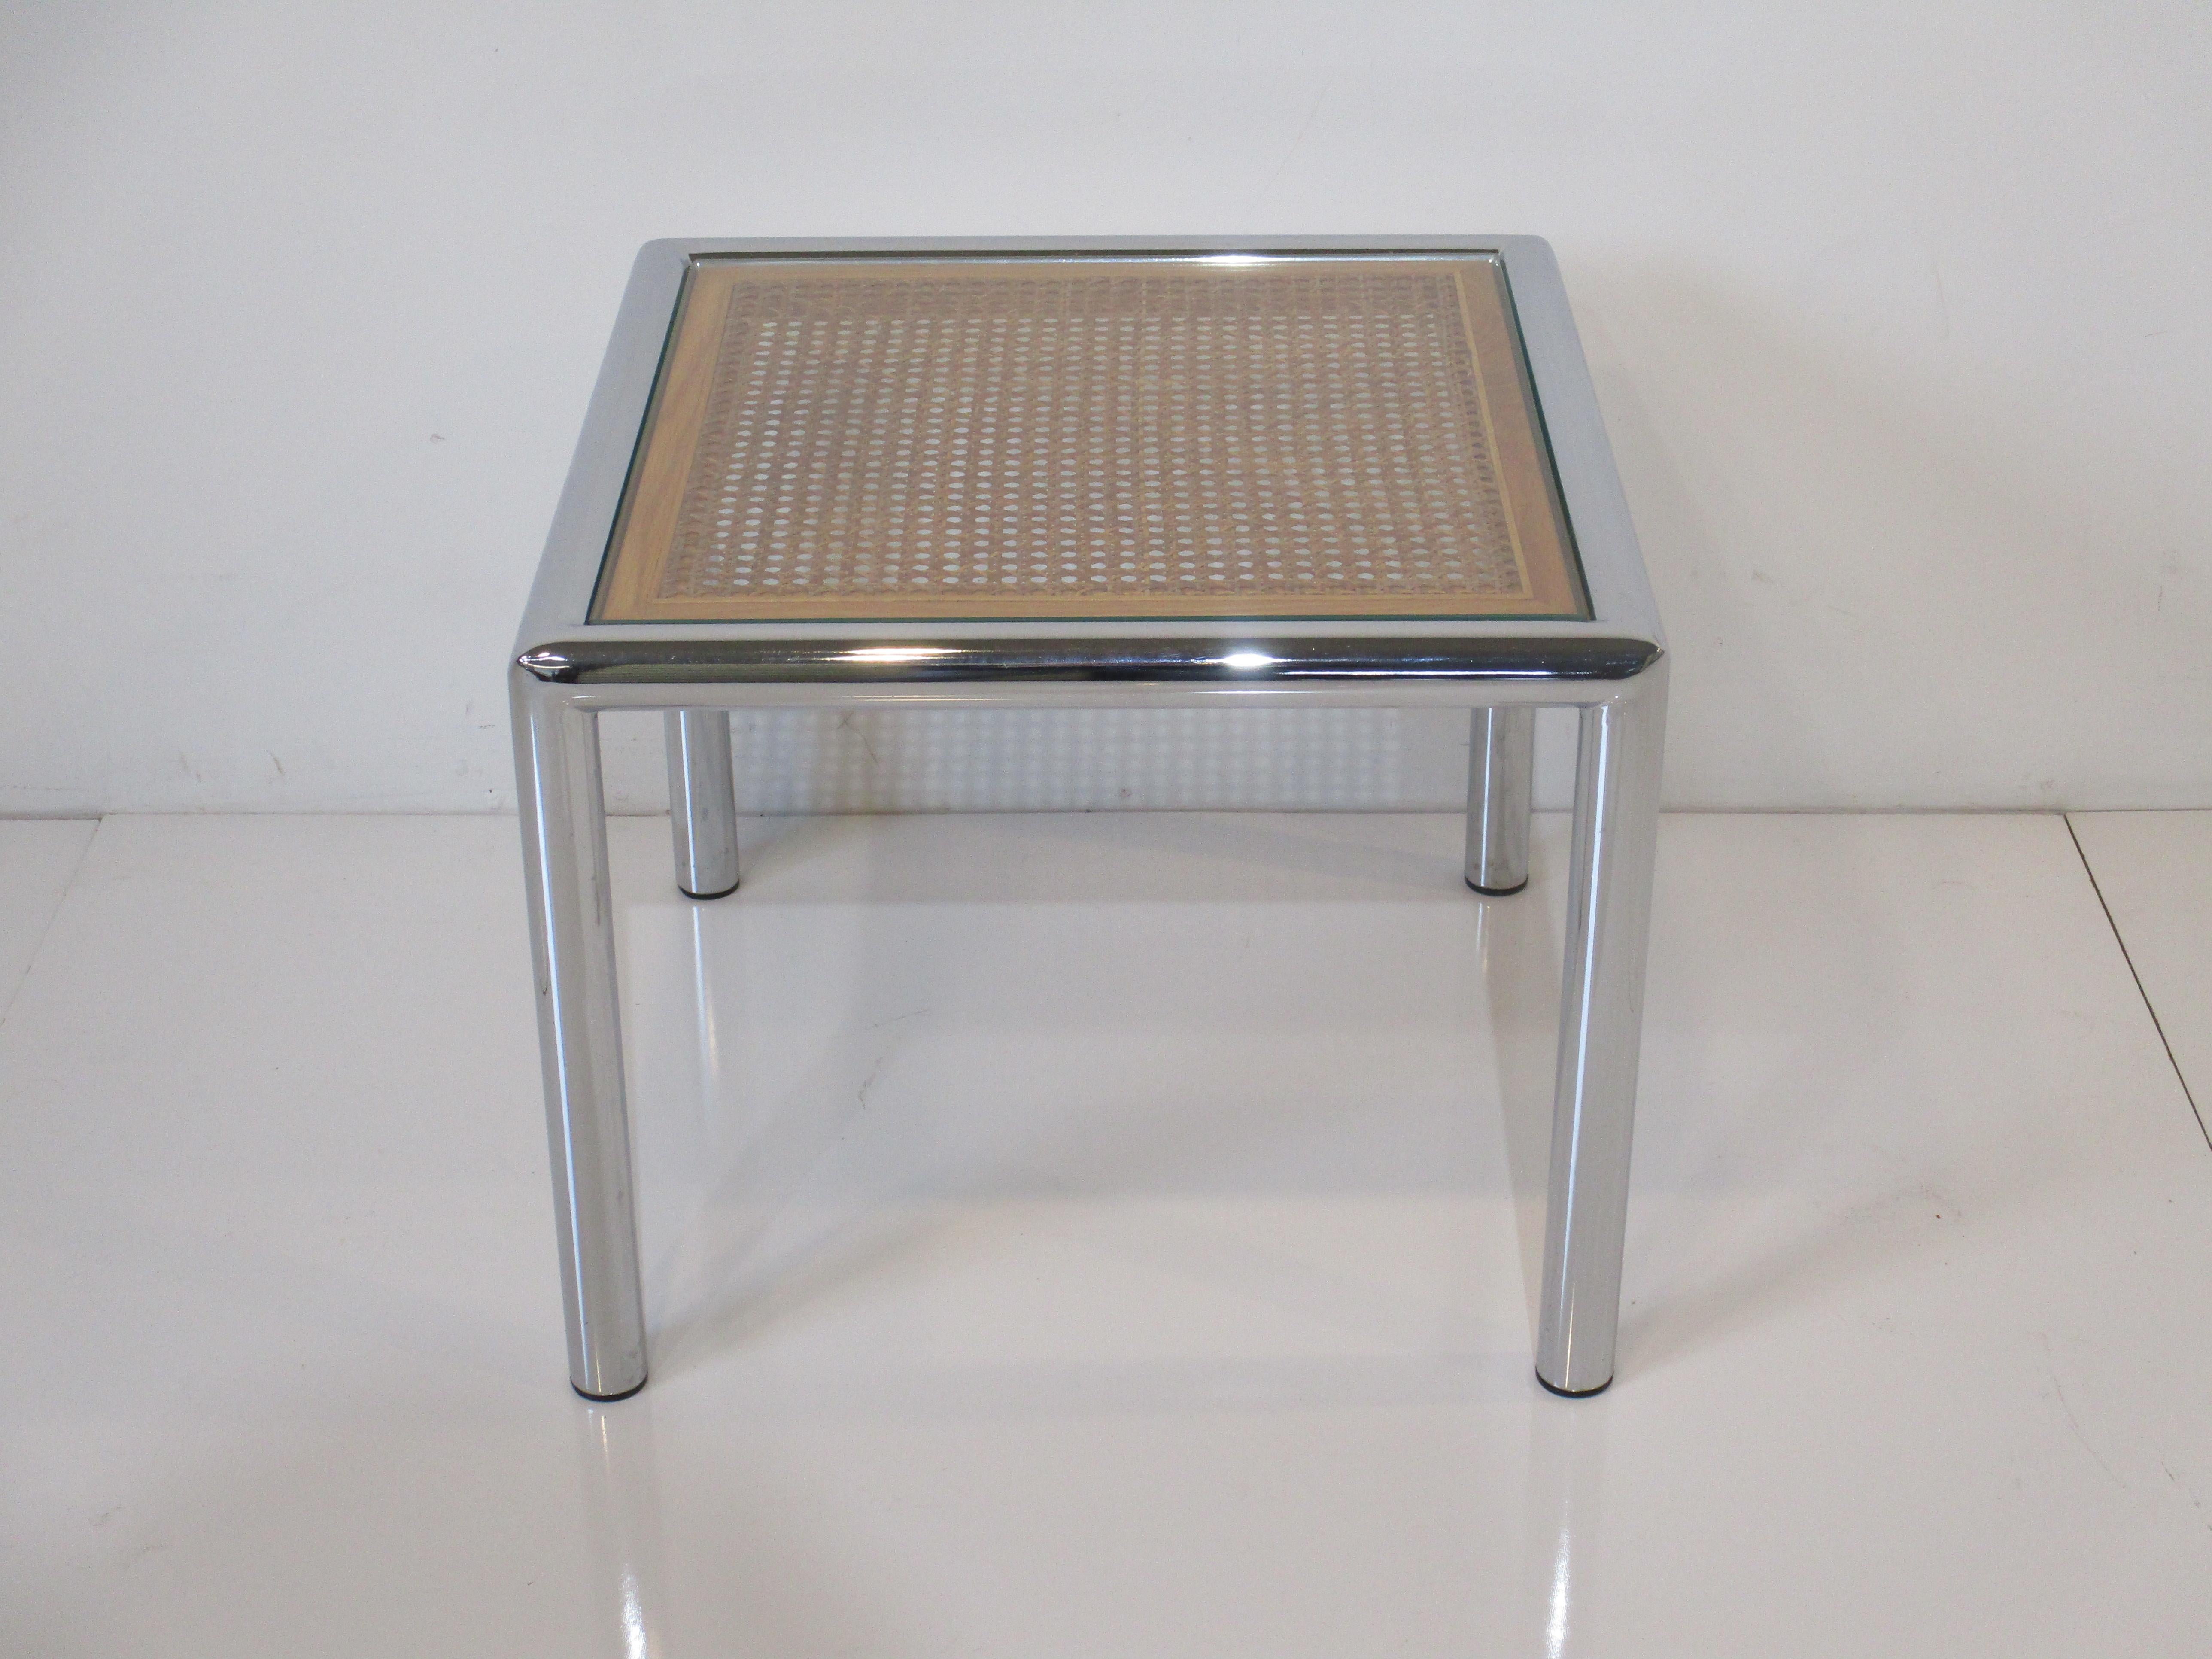 A chrome and woven cane topped side table covered in glass giving the piece a streamline and lighter feel . Strong rounded leg design and the wood frame around the caning shows the care to details in the piece manufactured by DIA Design Institute of